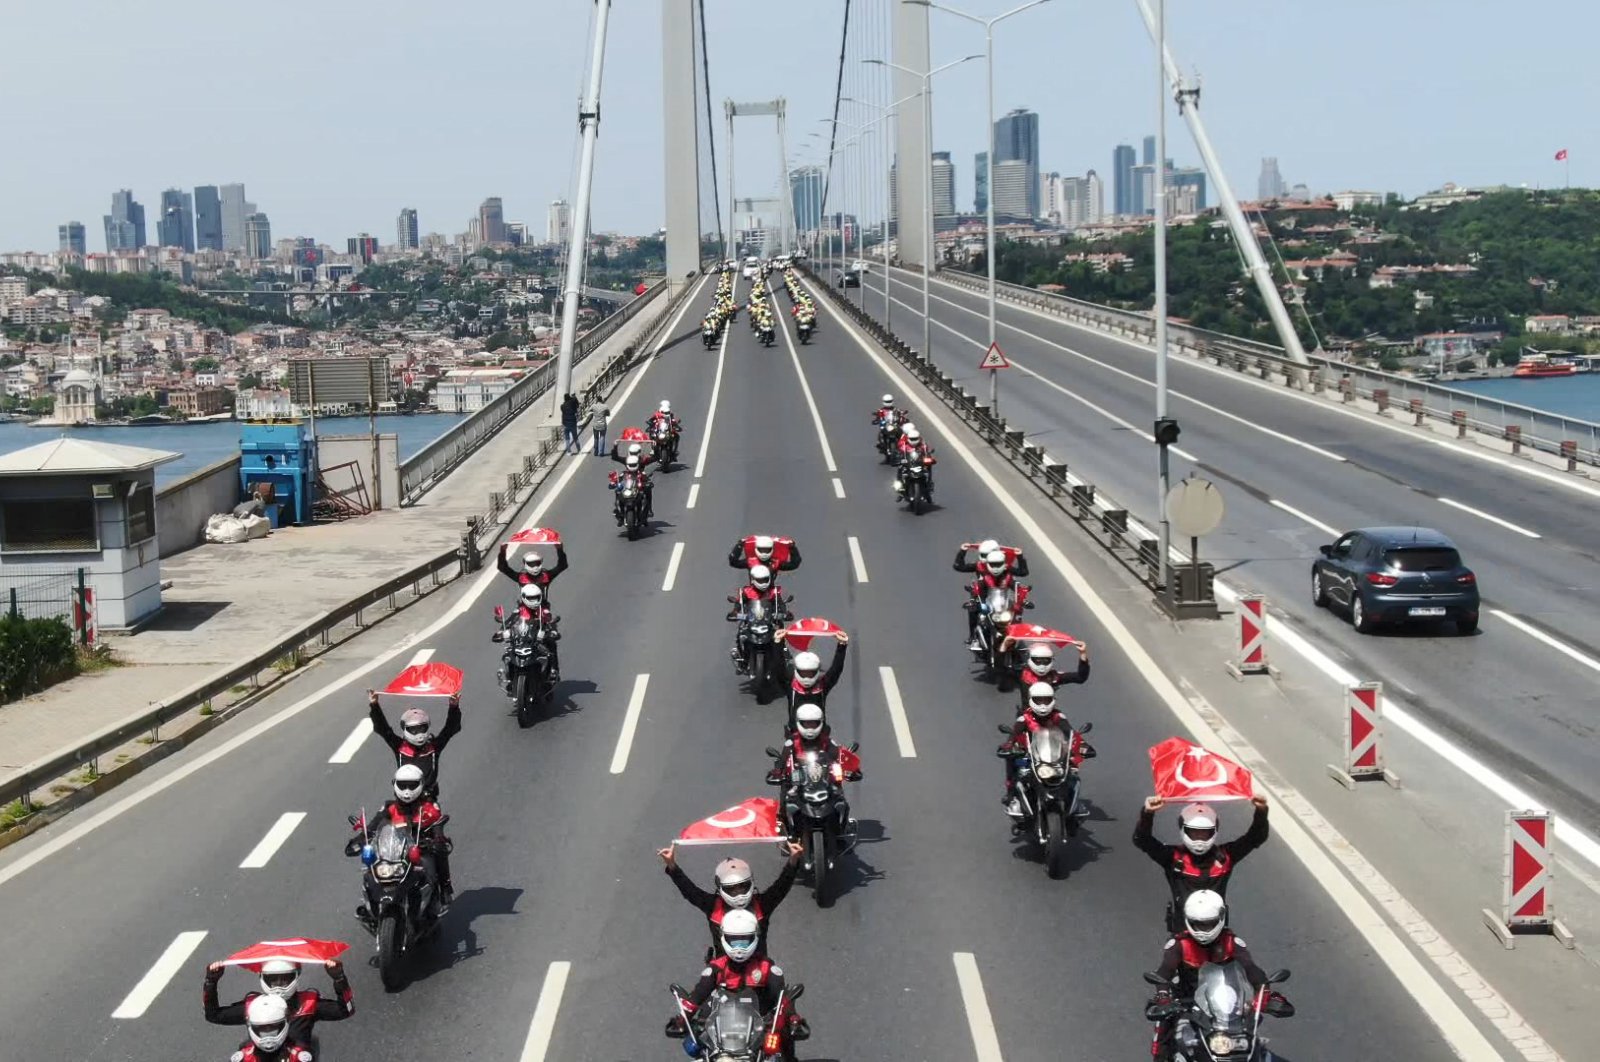 A Turkish police cortege takes place on the Bosporus Bridge, which is almost empty due to the four-day curfew imposed as part of the coronavirus struggle, Istanbul, Turkey, May 19, 2020. (DHA Photo)